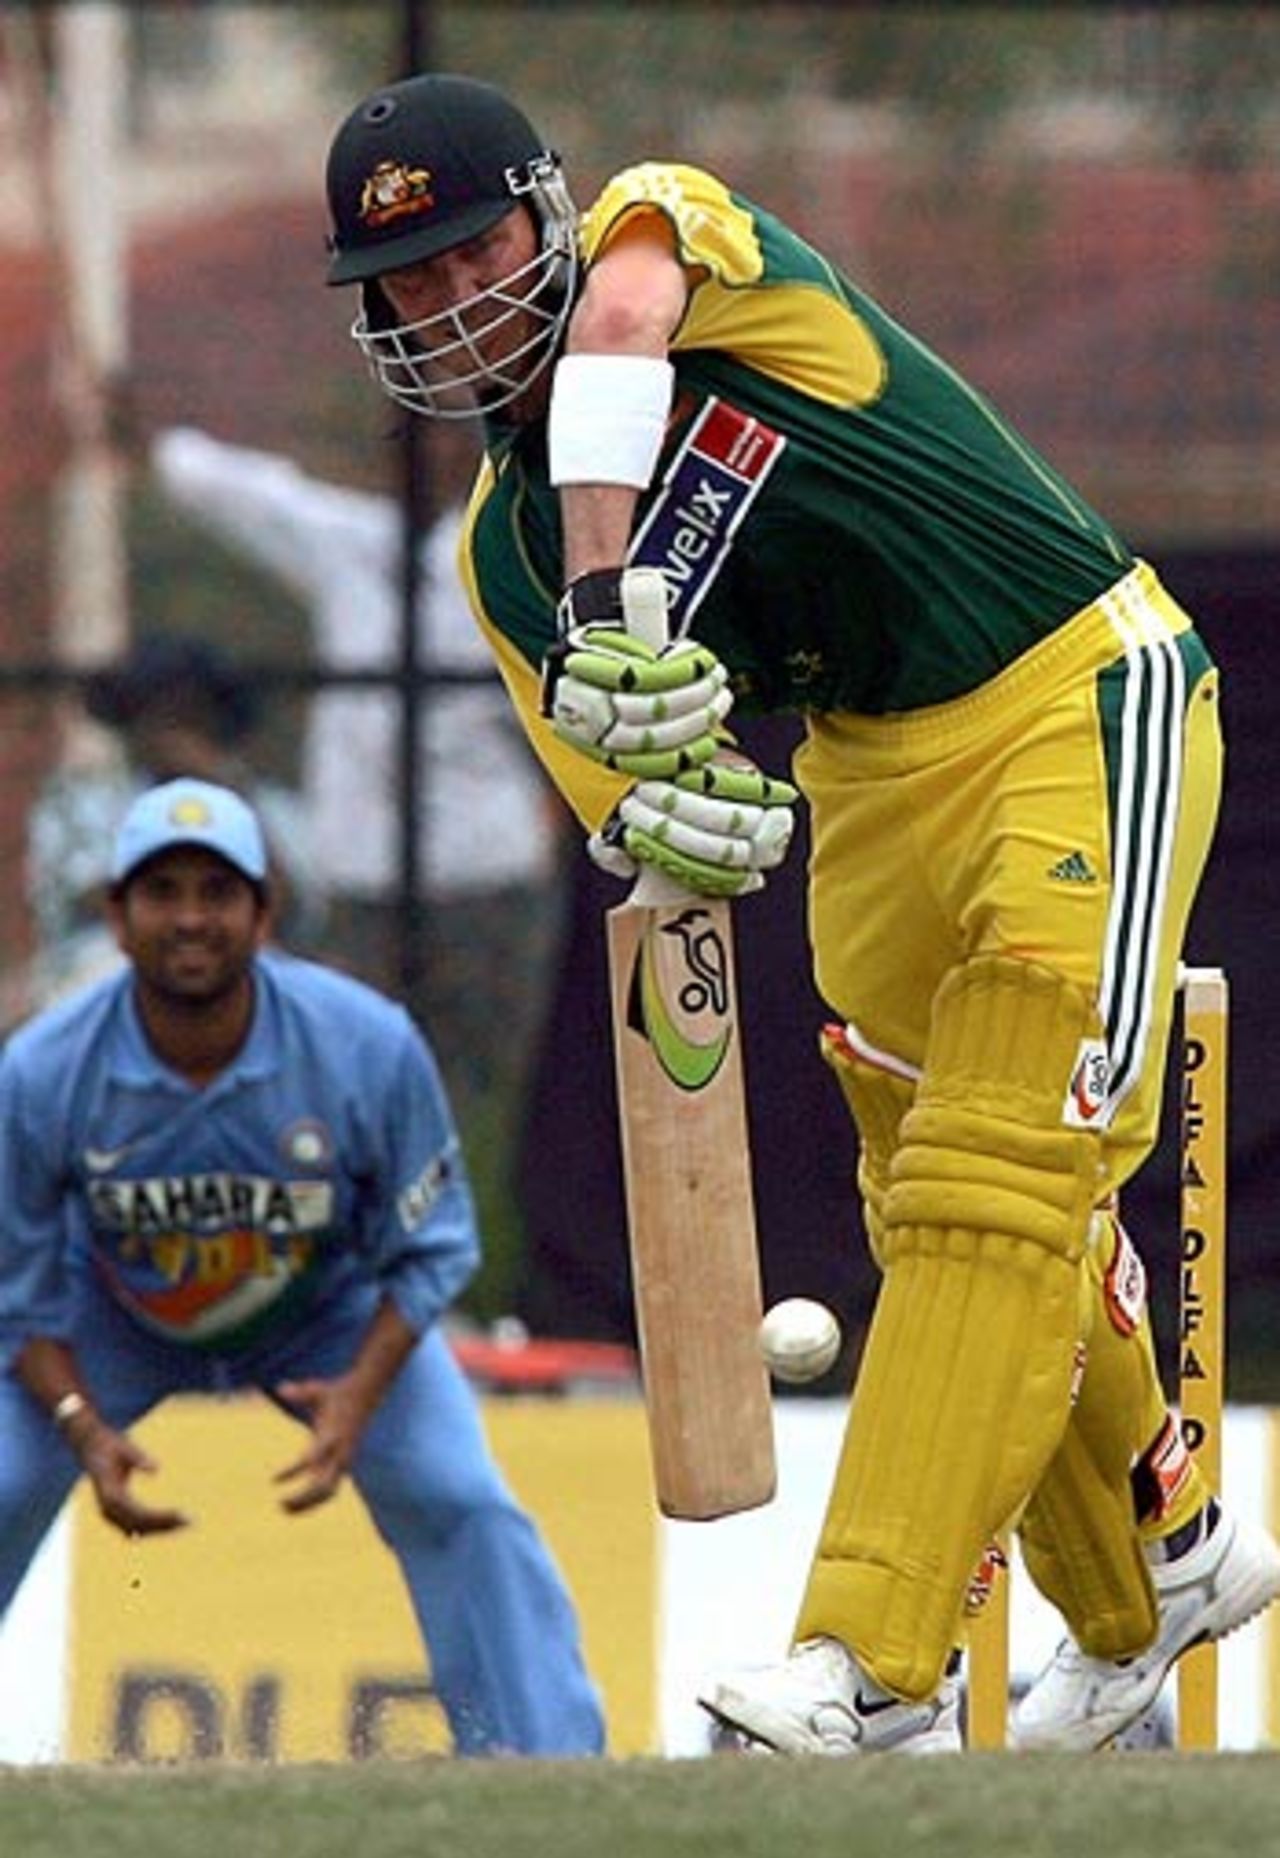 Damien Martyn drives during his innings of 19, India v Australia, DLF Cup, 6th match, Kinrara Academy Oval, September 22, 2006